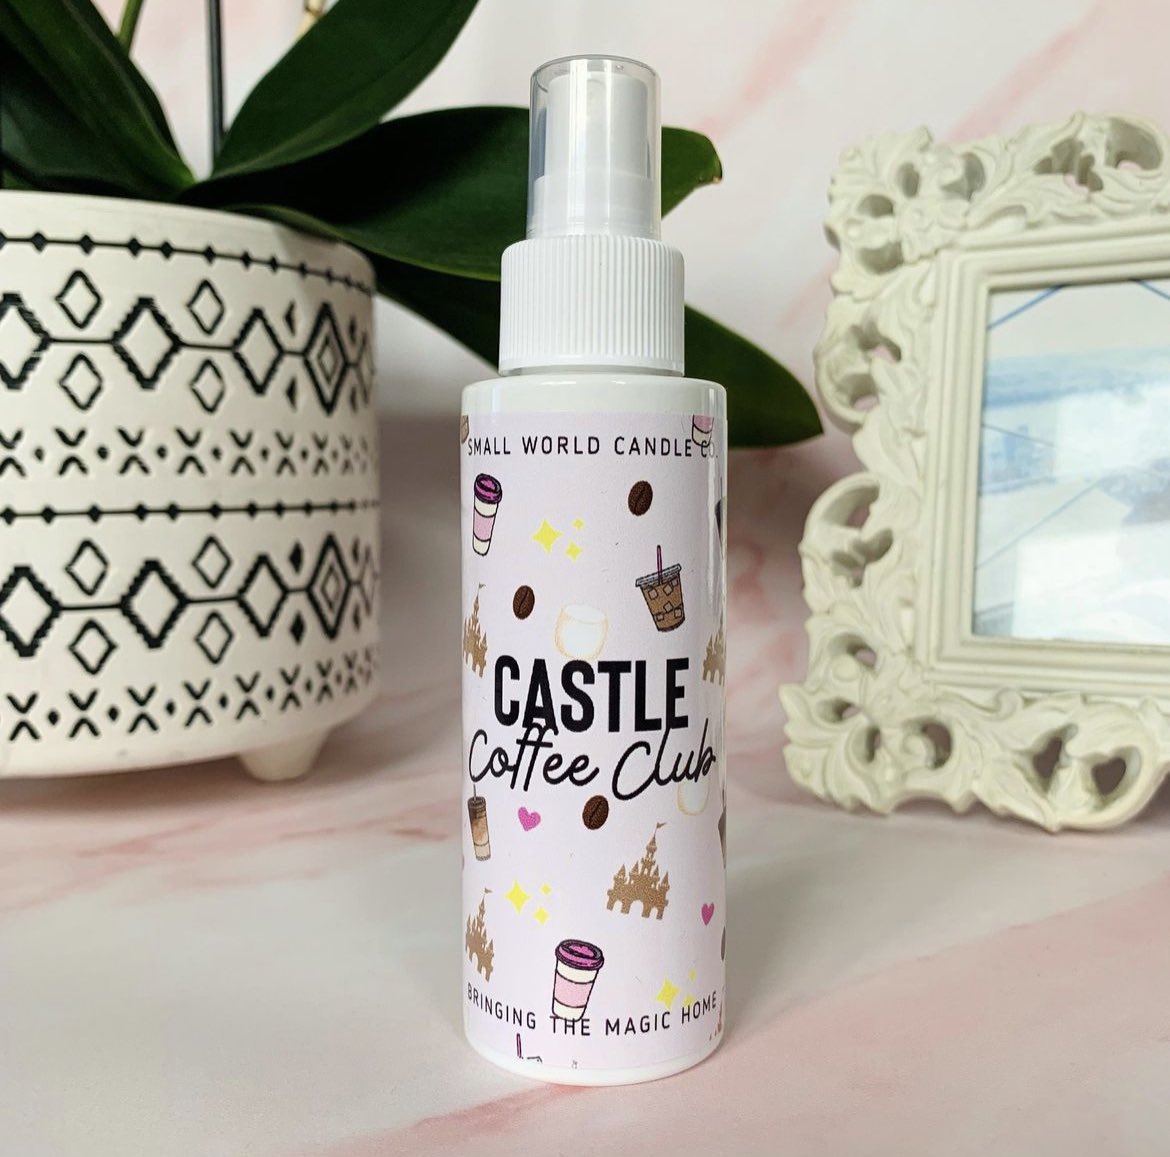 Our Castle Coffee Club scent has scents of marshmallow and toffee nut. We love it so much! ☁️✨ #candle #waxmelt #soywax #uk #scented #gift #present #home #smallbusiness #smallshop #decor #disney #inspired #handpoured #uk #etsy